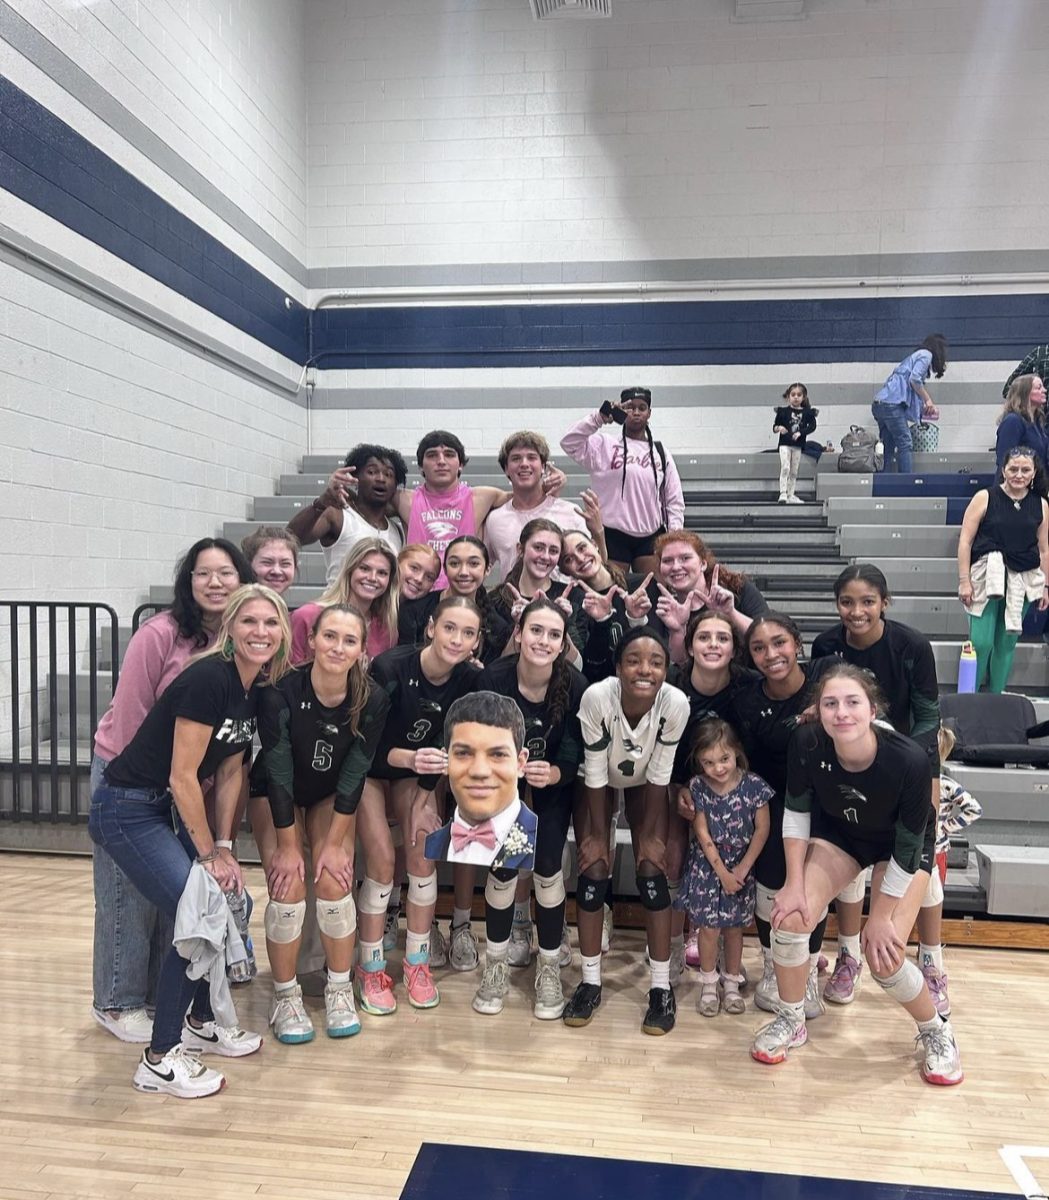 The Green Hope volleyball team poses for a picture after a successful 3-0 win against Millbrook High School, advancing them into the Sweet Sixteen. Photo used with permission from @greenhopevb Via Instagram.